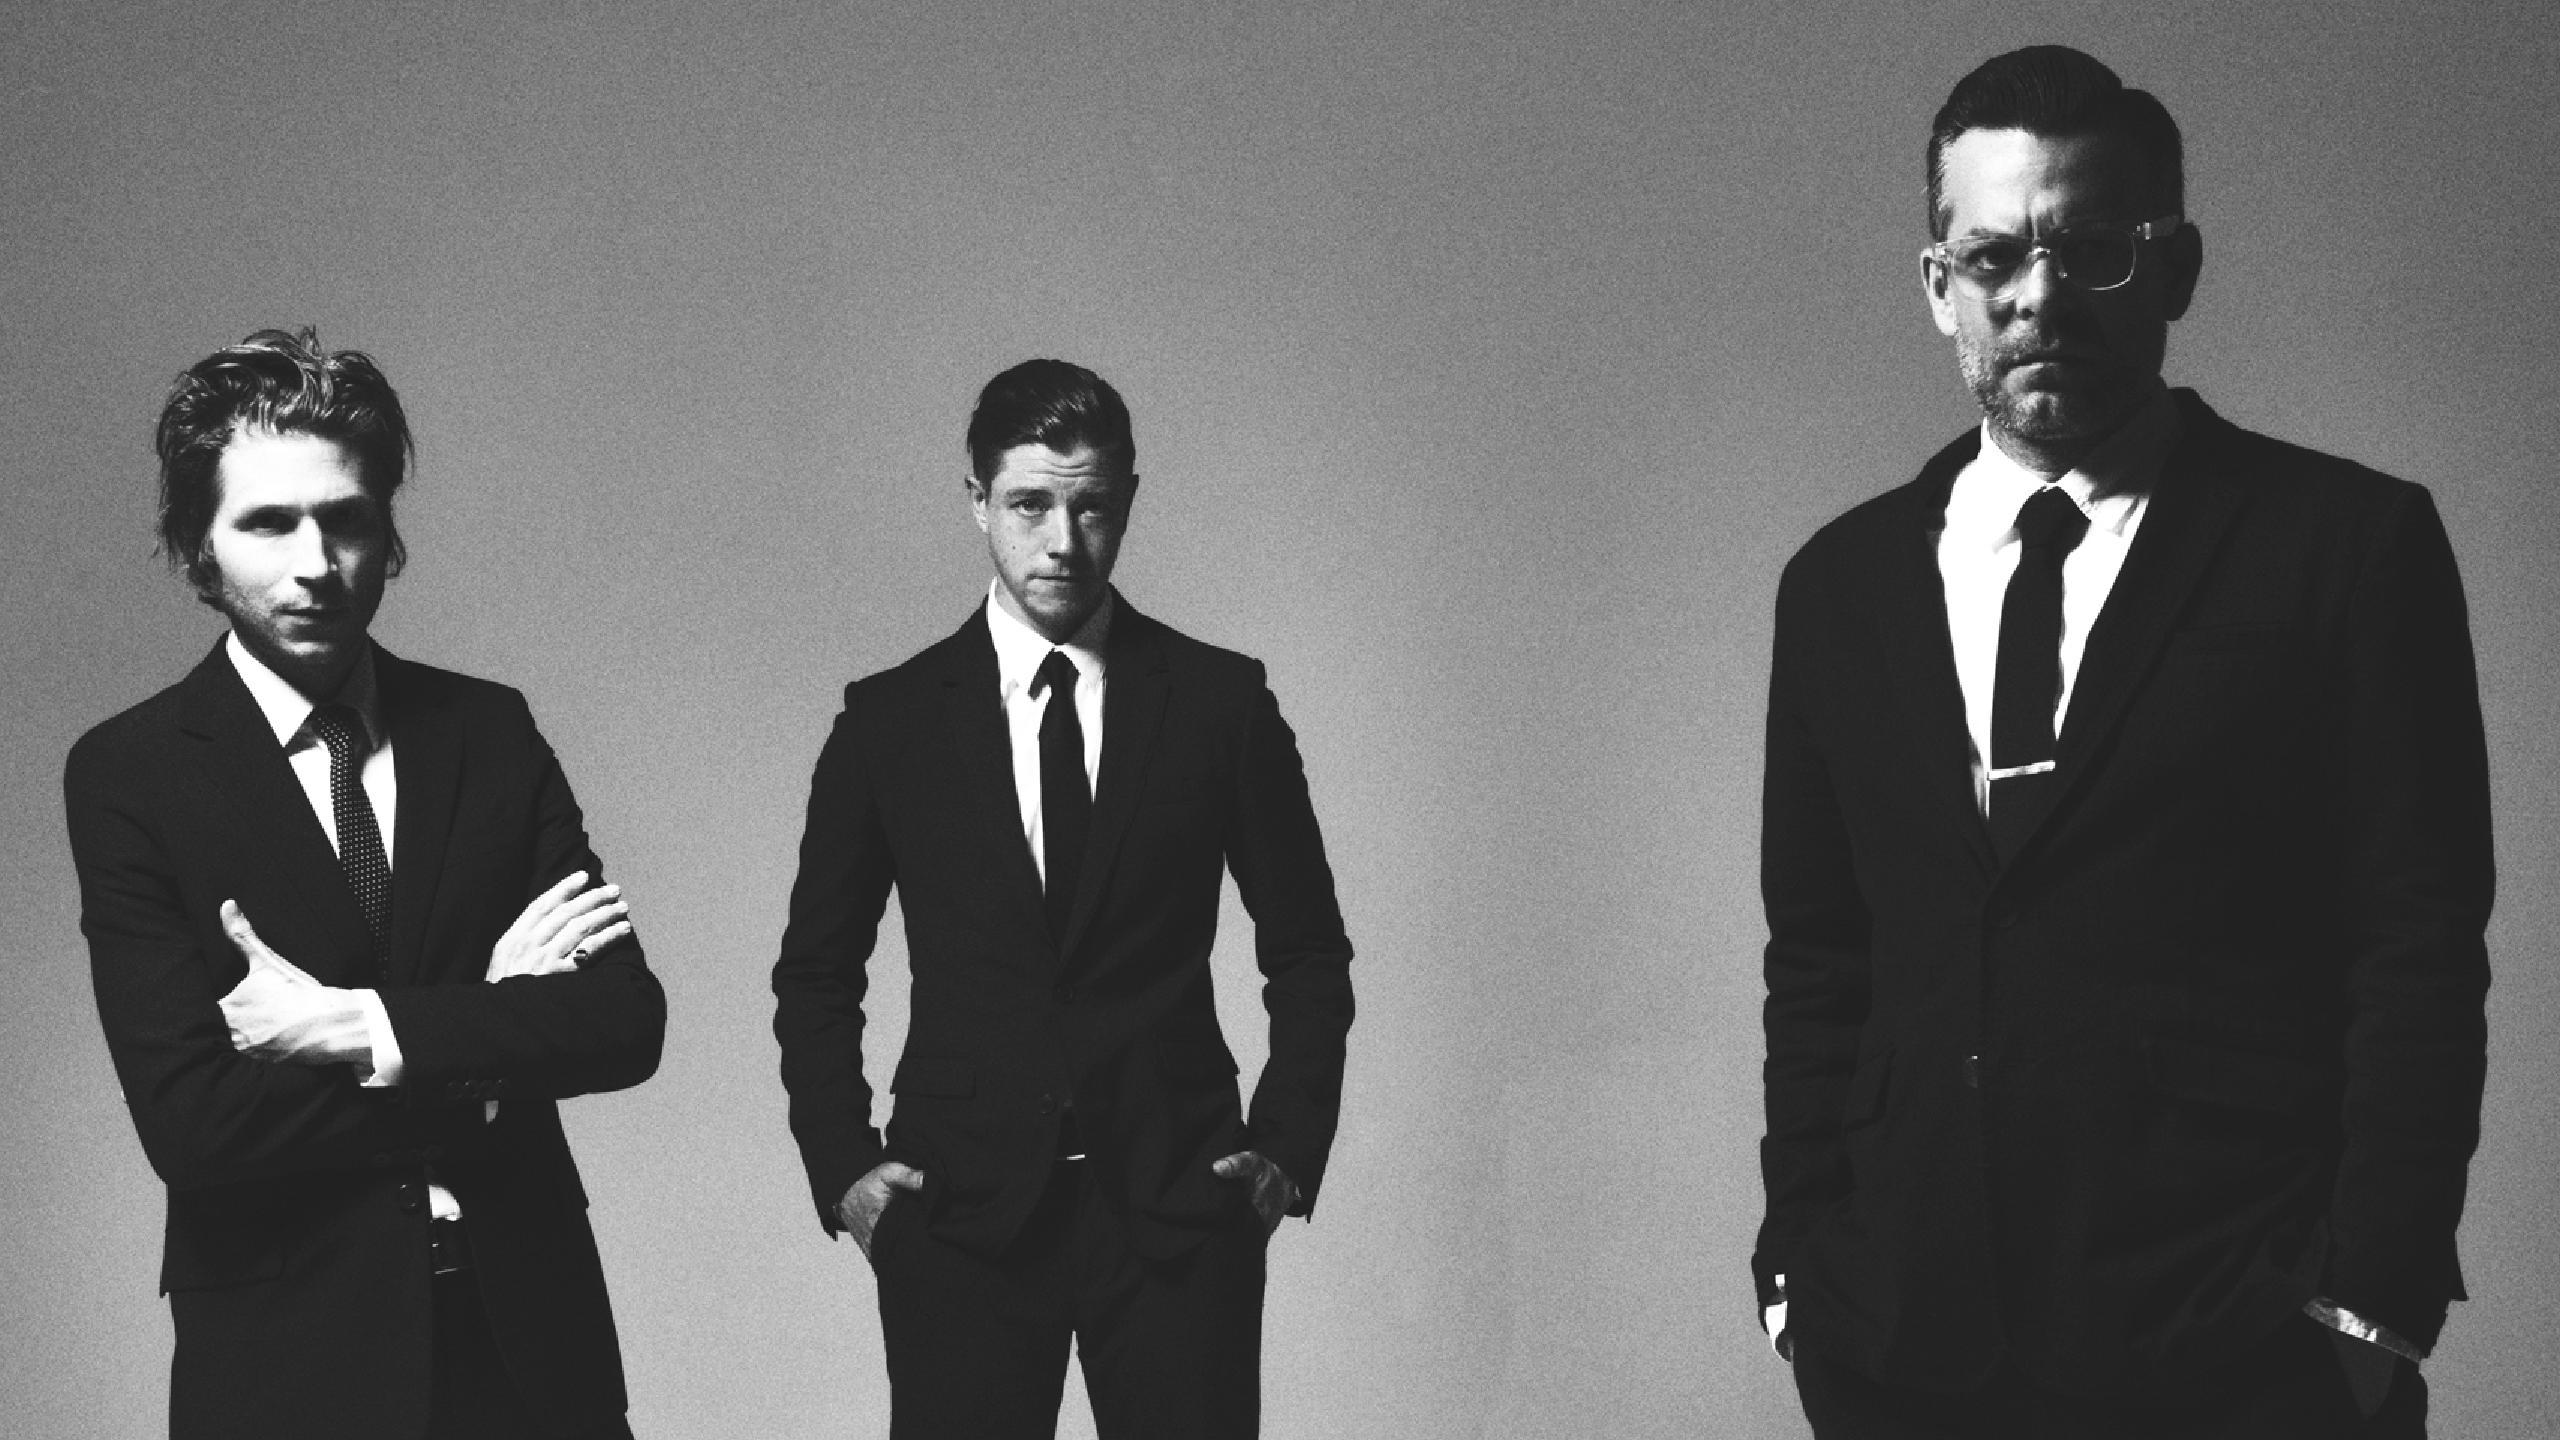 Interpol tour dates 2021 2022. Interpol tickets and concerts. Wegow United States